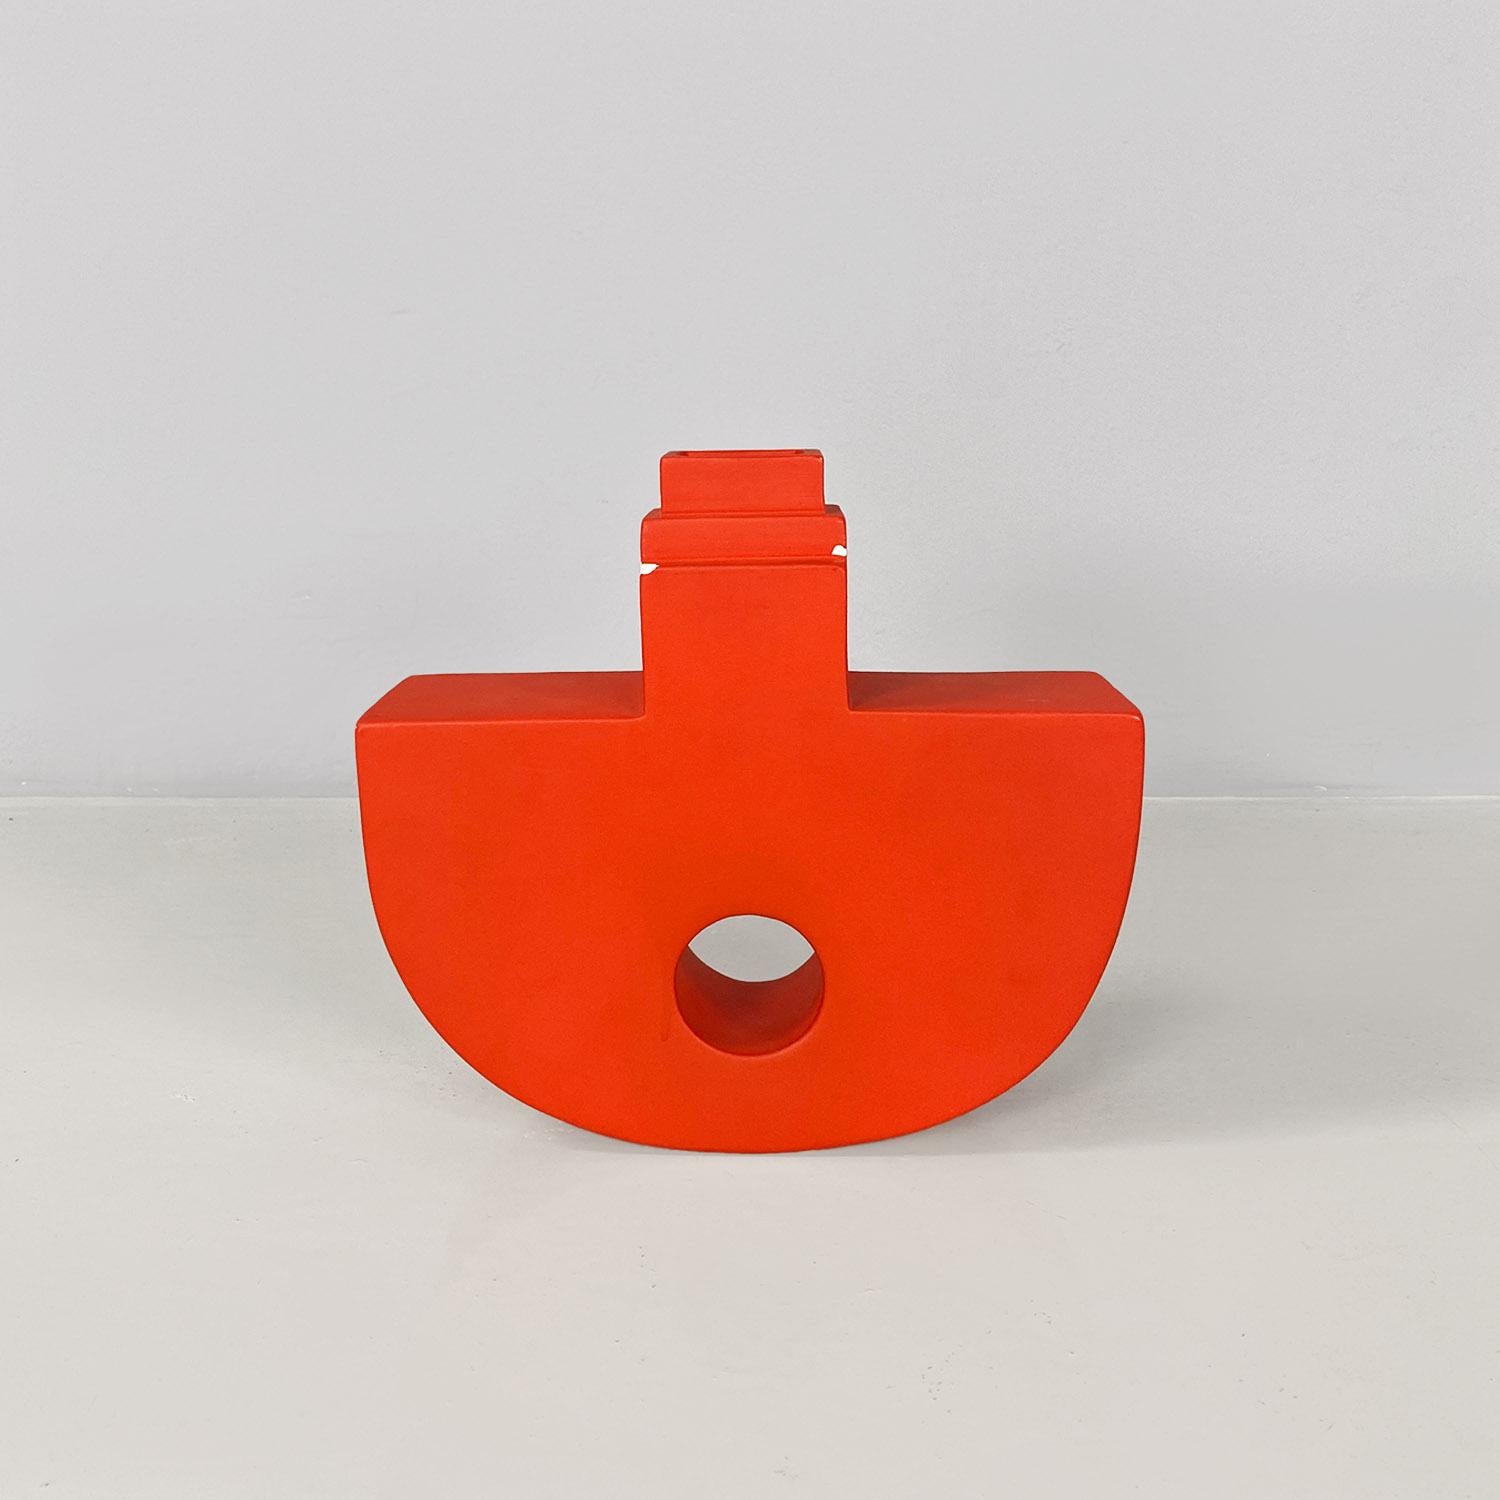 Italian modern red ceramic Dondolo sculpture vase by Florio Pac Paccagnella 2023 In Excellent Condition For Sale In MIlano, IT